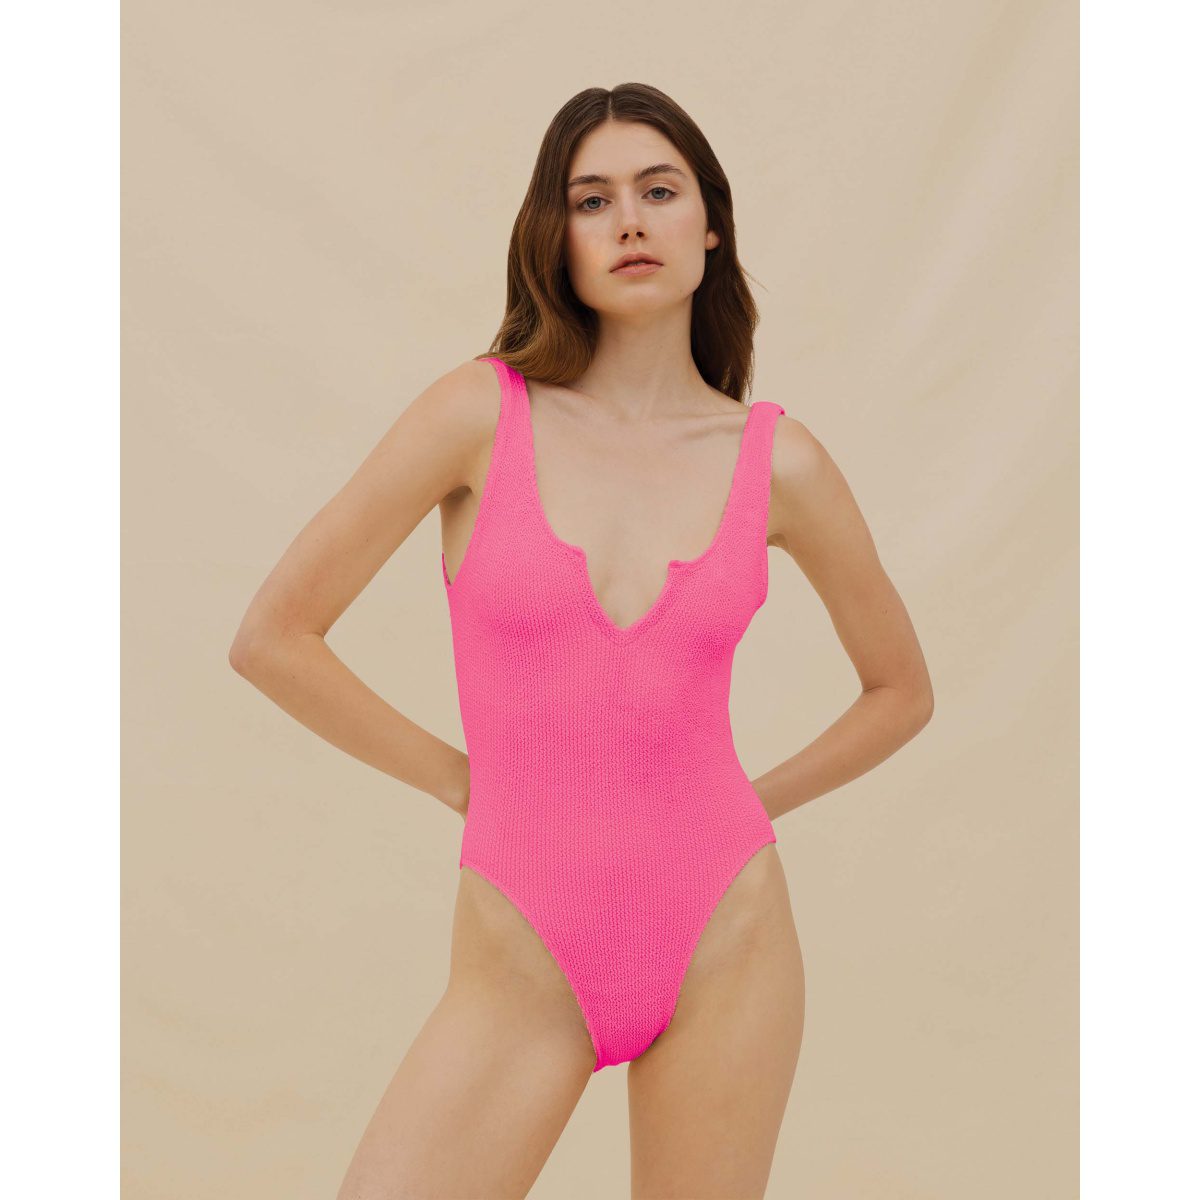 ava-one-size-one-piece-swimsuit-pink-bubble-gum-swfb04-pink-bubble-gum-pink-bubble-gumkOMb-1.jpg